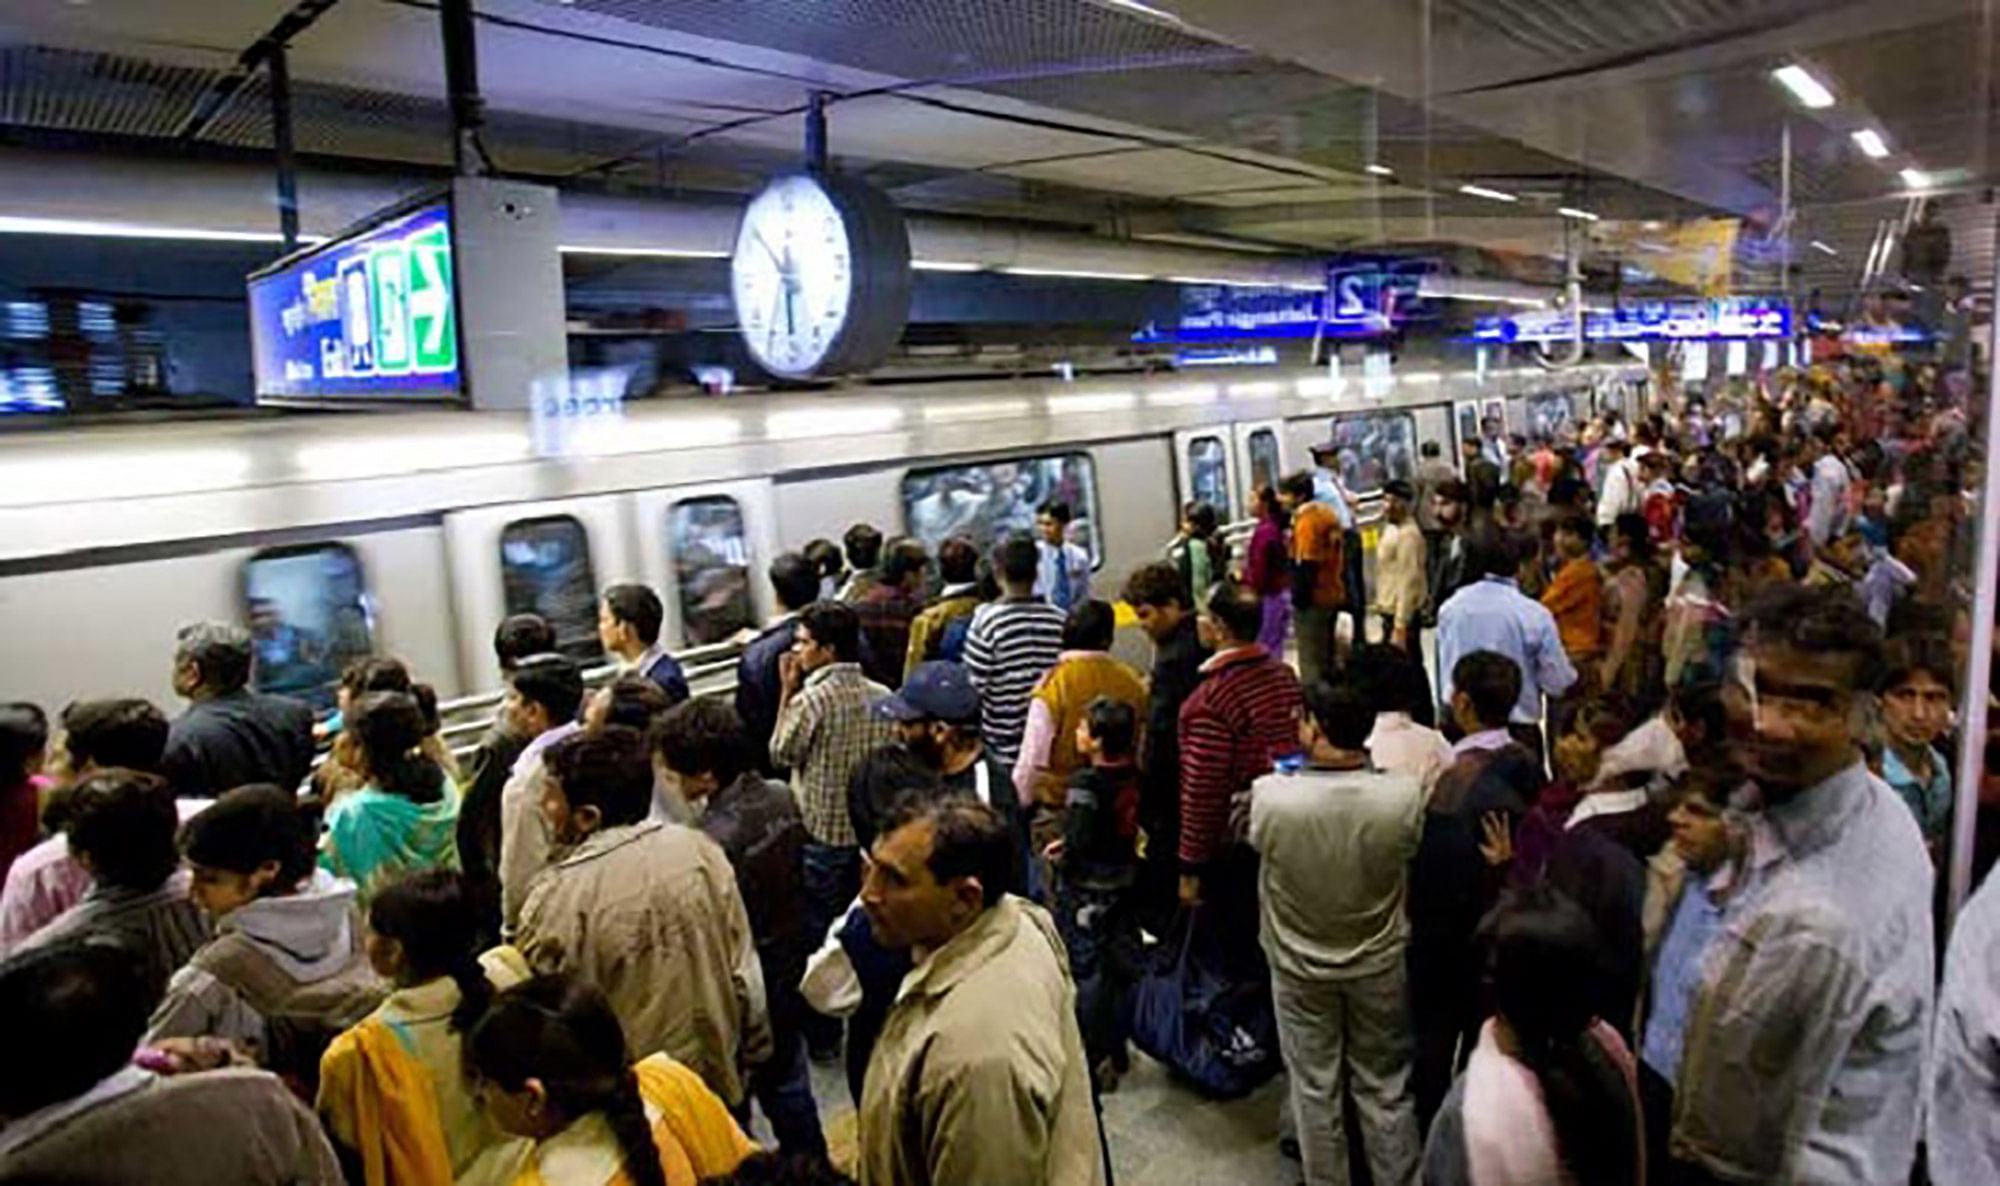  The crowded Rajeev Chowk metro station. (Photo: <a href="https://twitter.com/indiacom/status/649681127095955456">Twitter</a>)